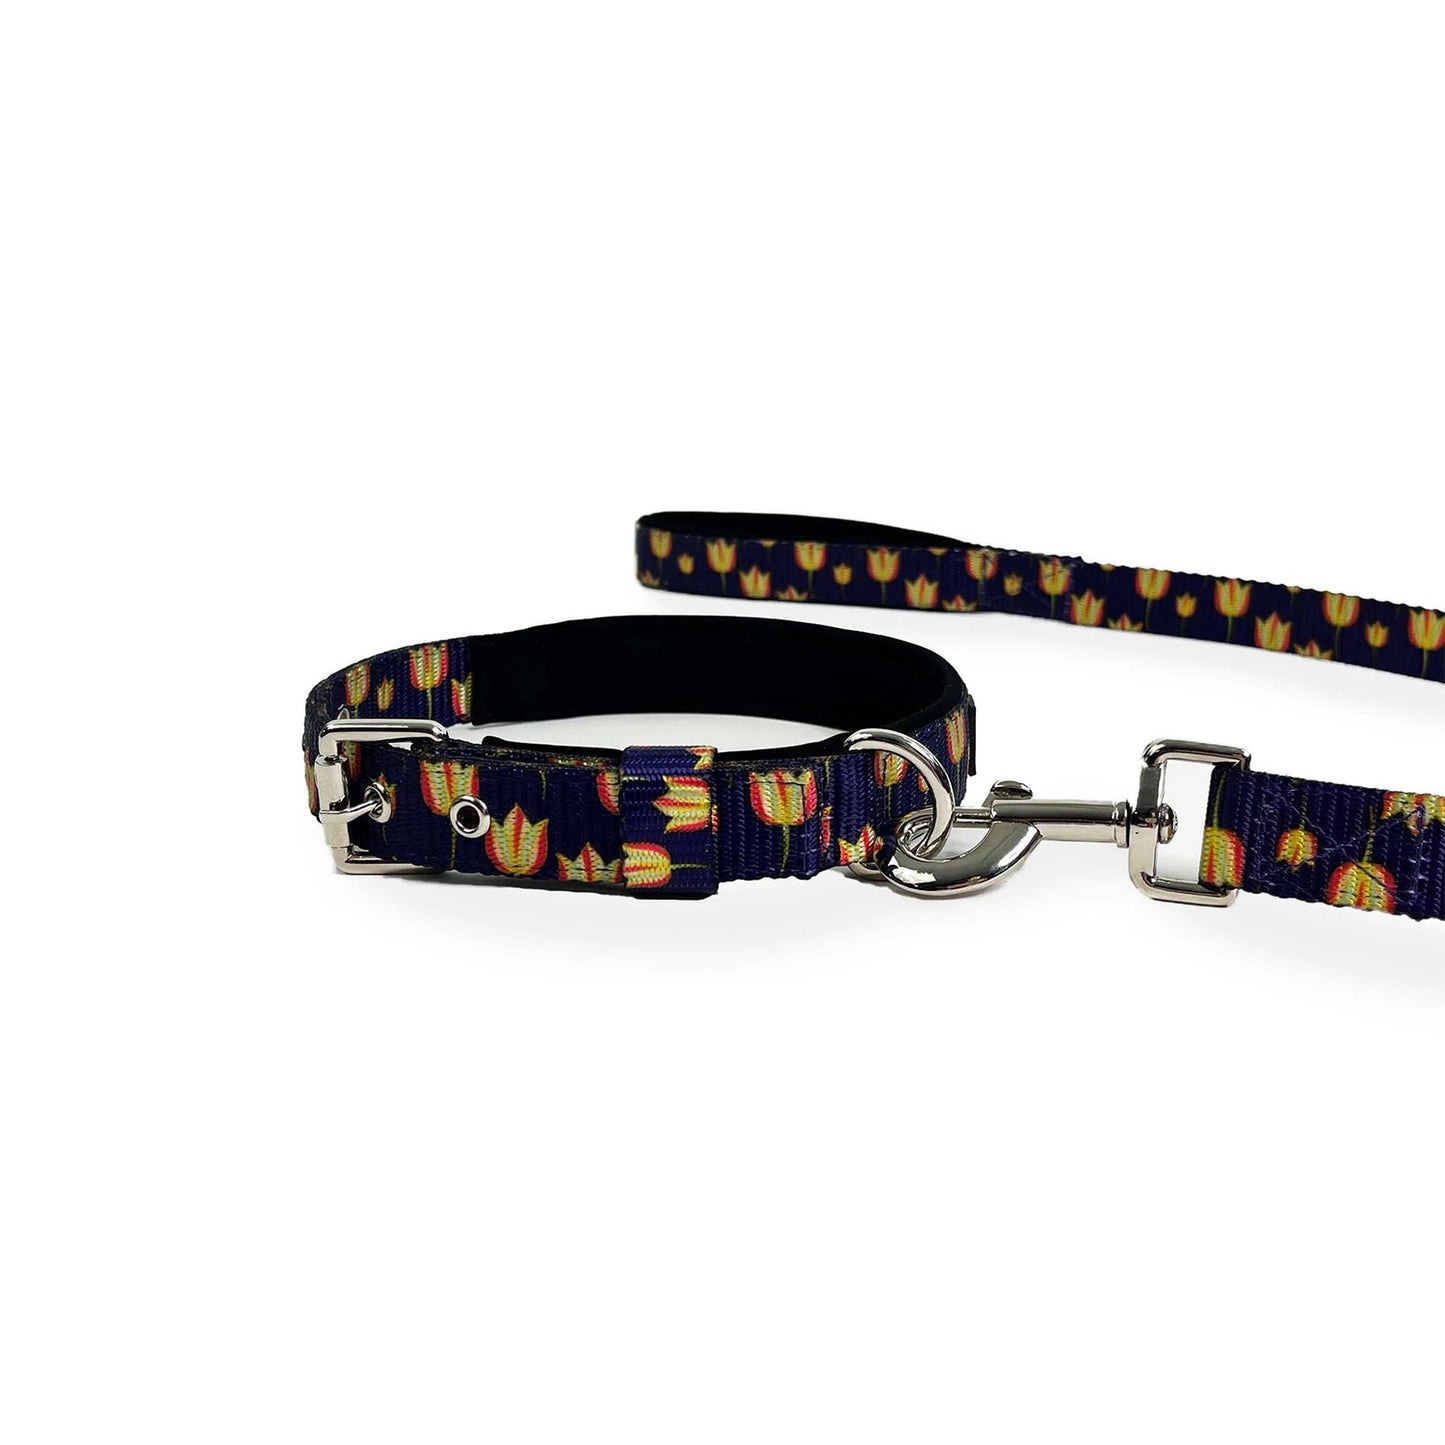 Forfurs - Spring Bloom Pin Buckle Collar For Dogs & Cats